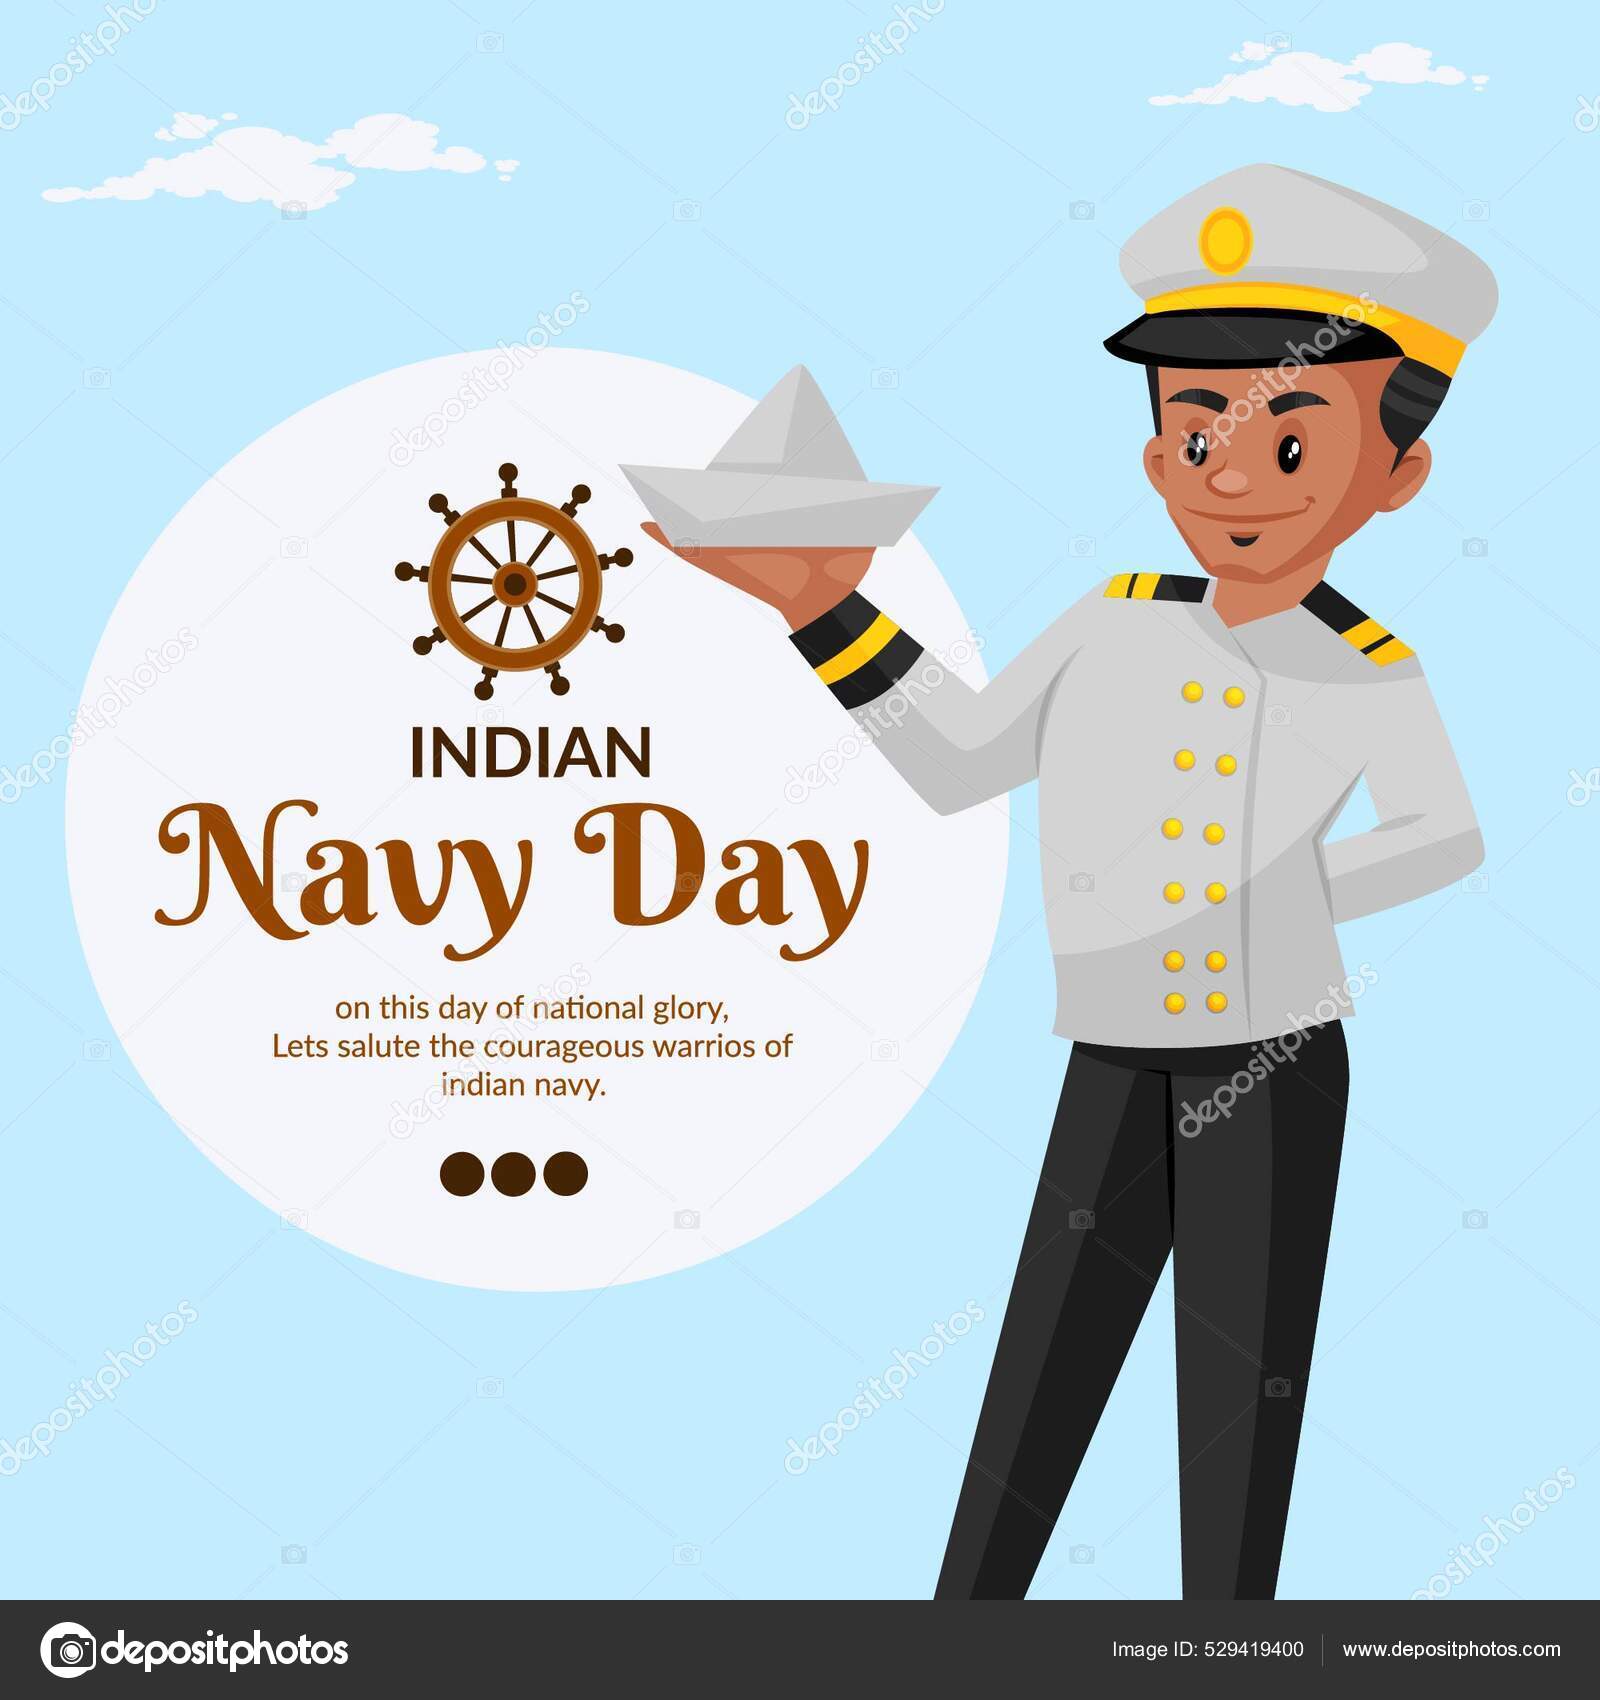 Indian navy day poster drawing | drawing for competition on navy day -  YouTube